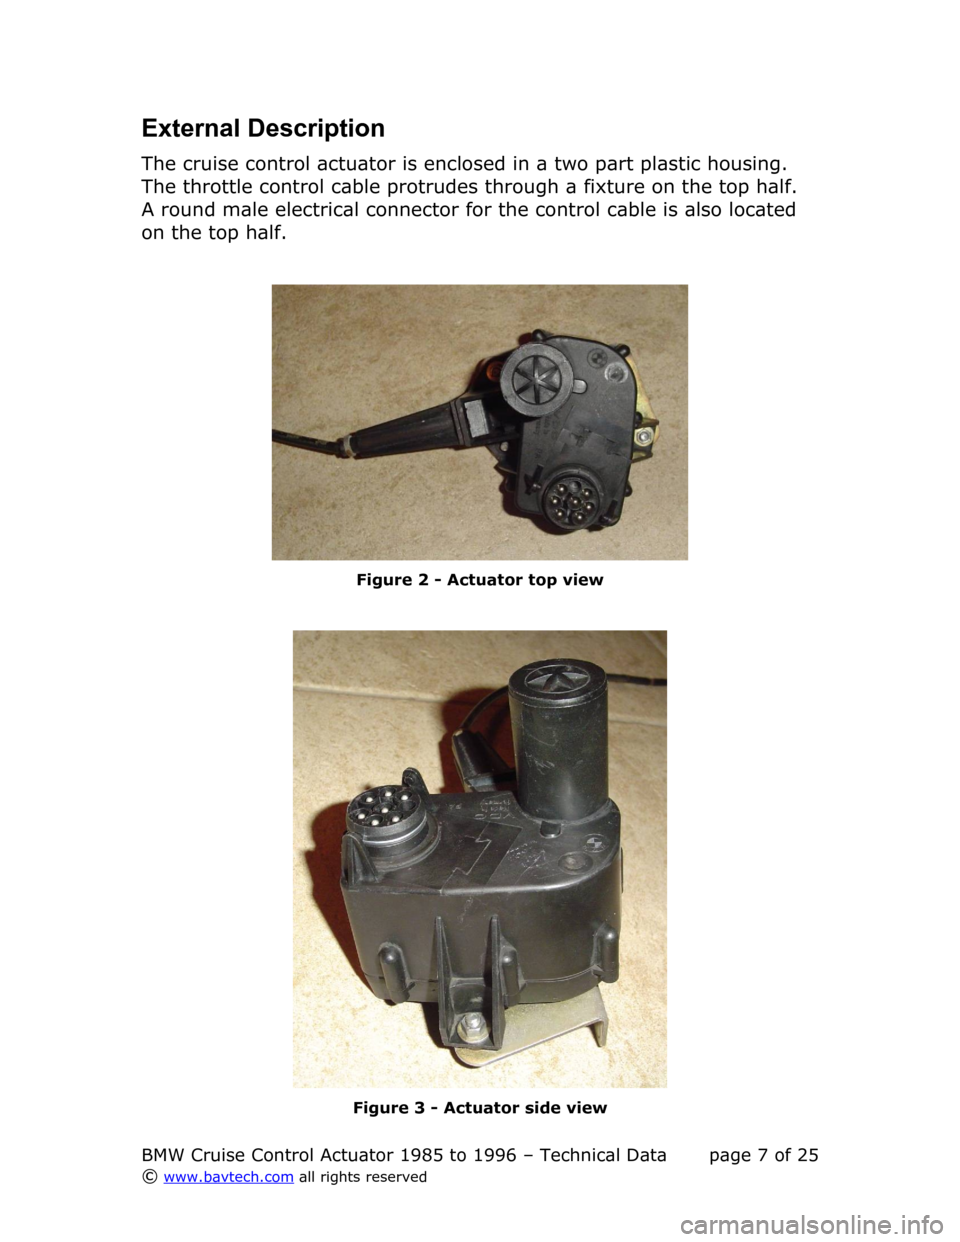 BMW 7 SERIES 1991 E32 Cruise Control Acutator External Description
The cruise control actuator is enclosed in a two part plastic housing.  
The throttle control cable protrudes through a fixture on the top half.  
A round male electrical connecto